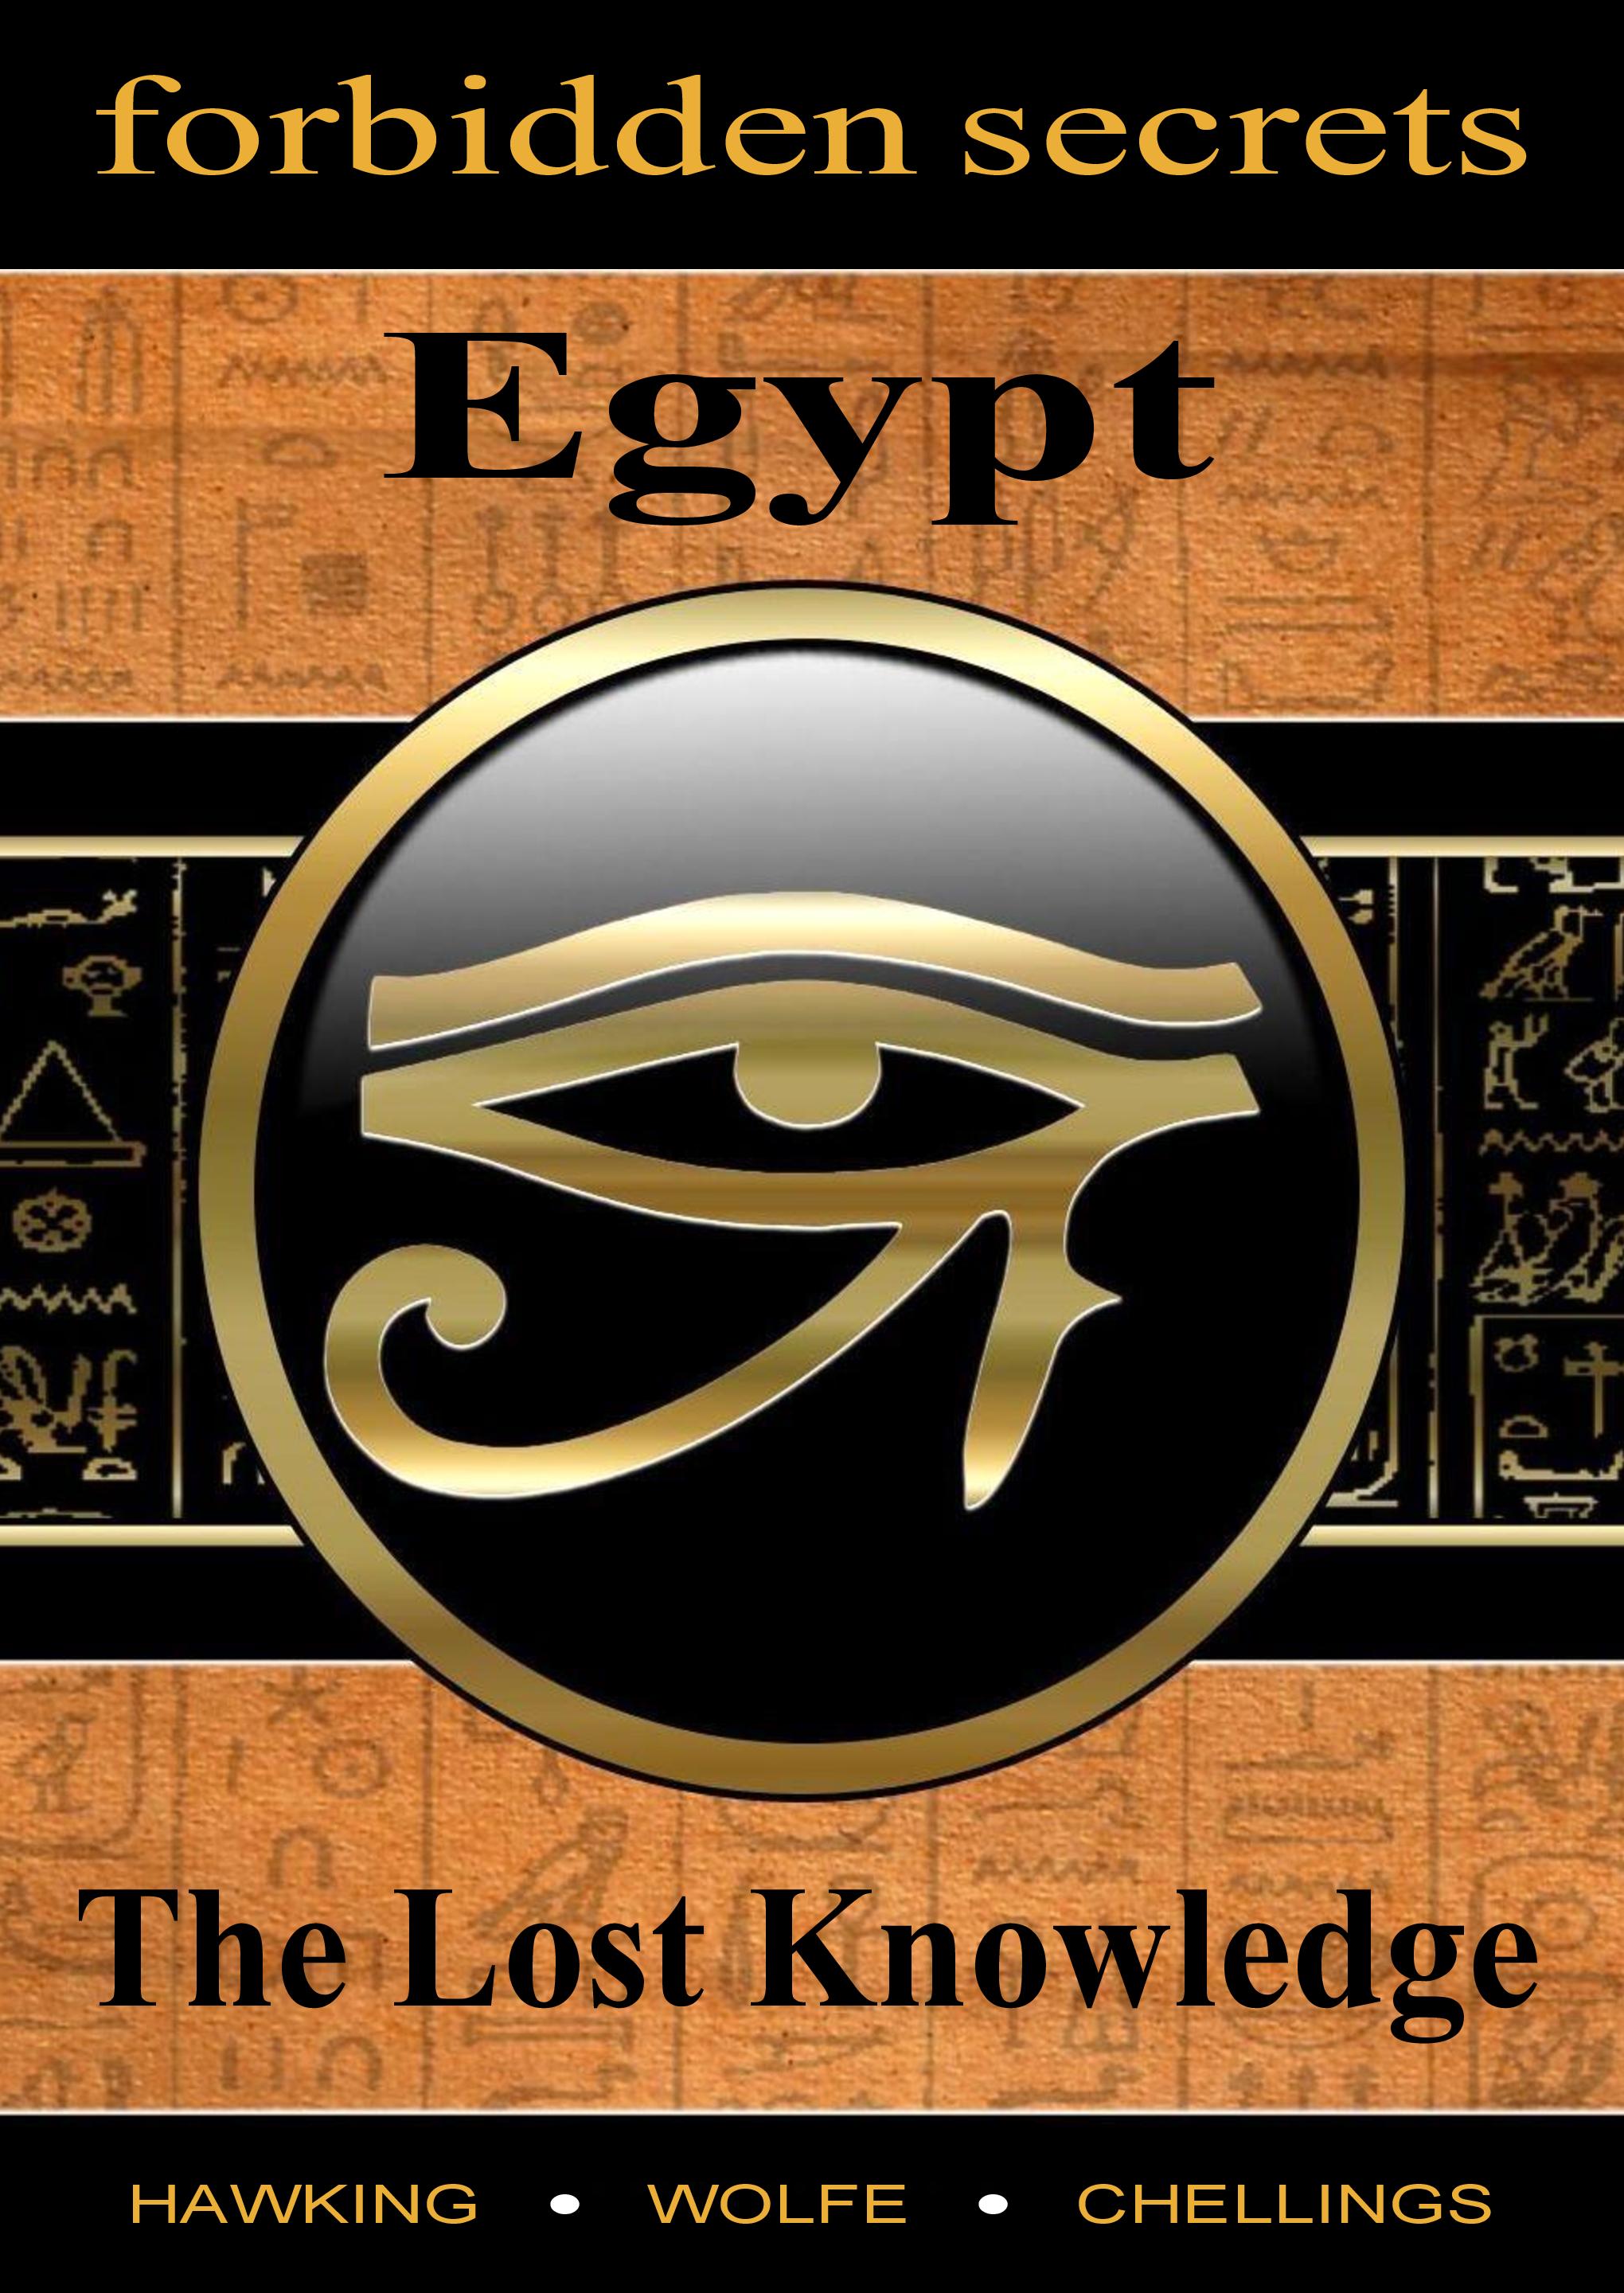 Egypt, The Lost Knowledge book cover